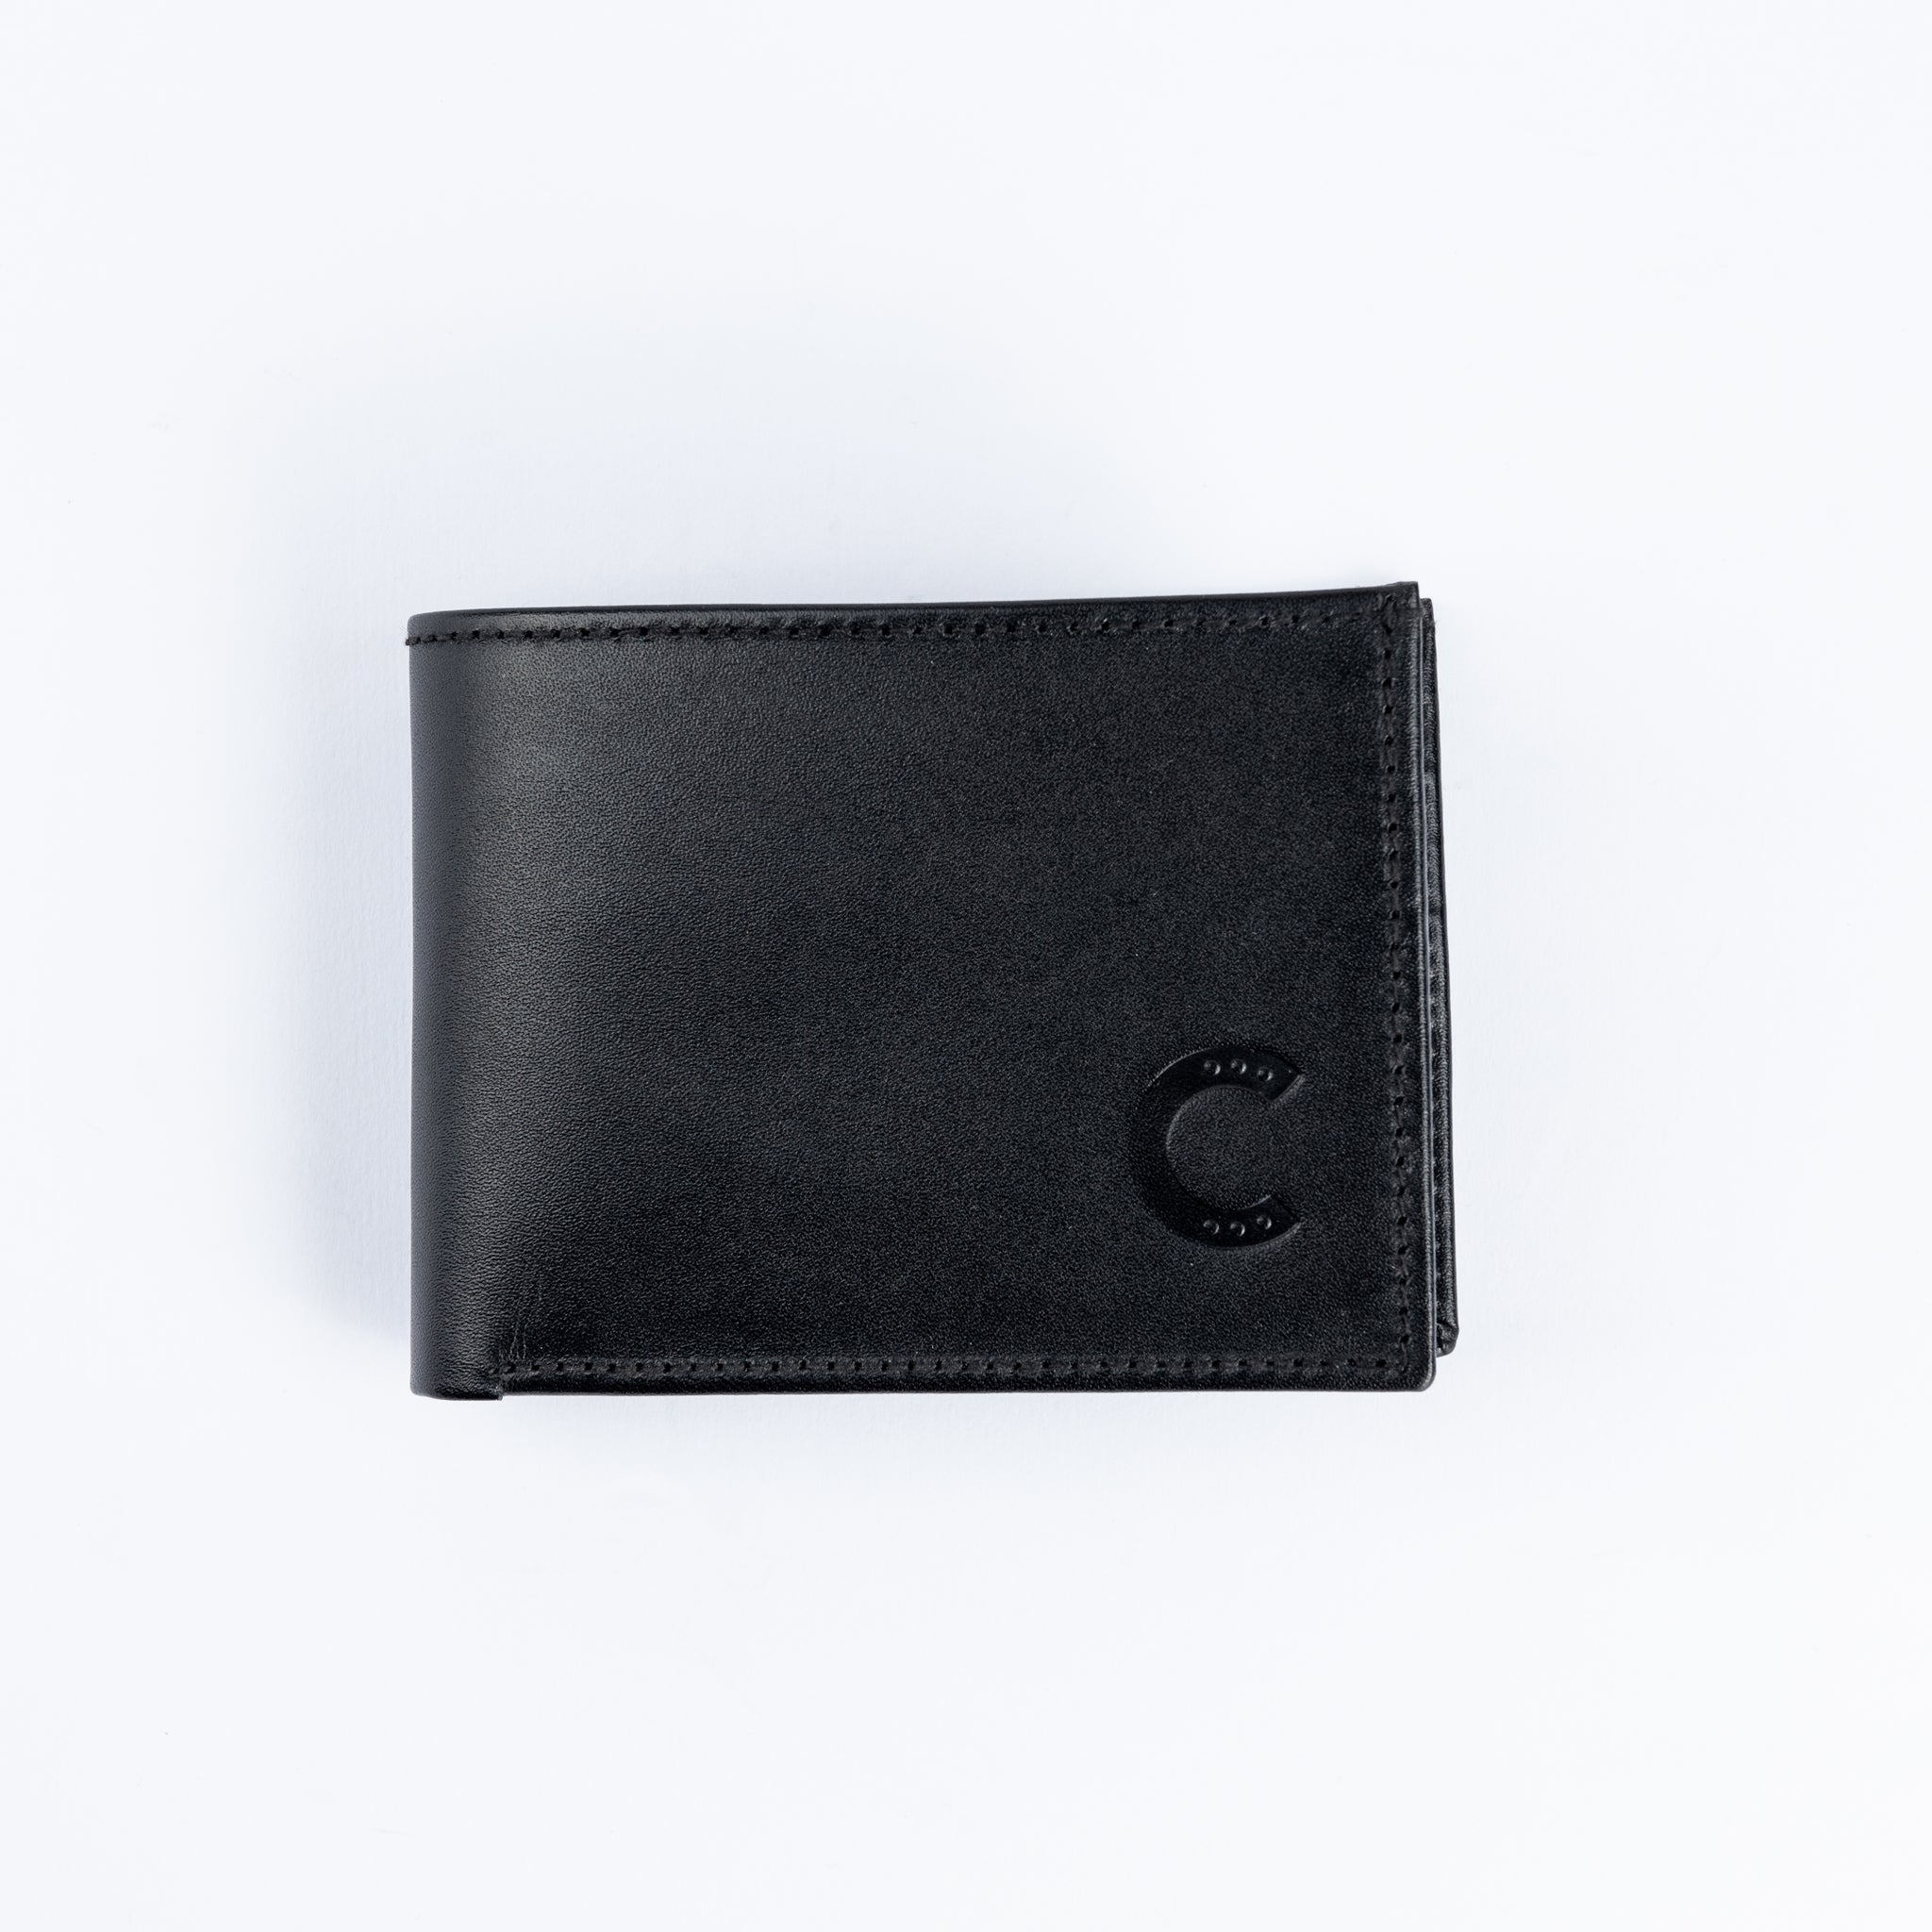 Leather Wallet - Black - Hatchill